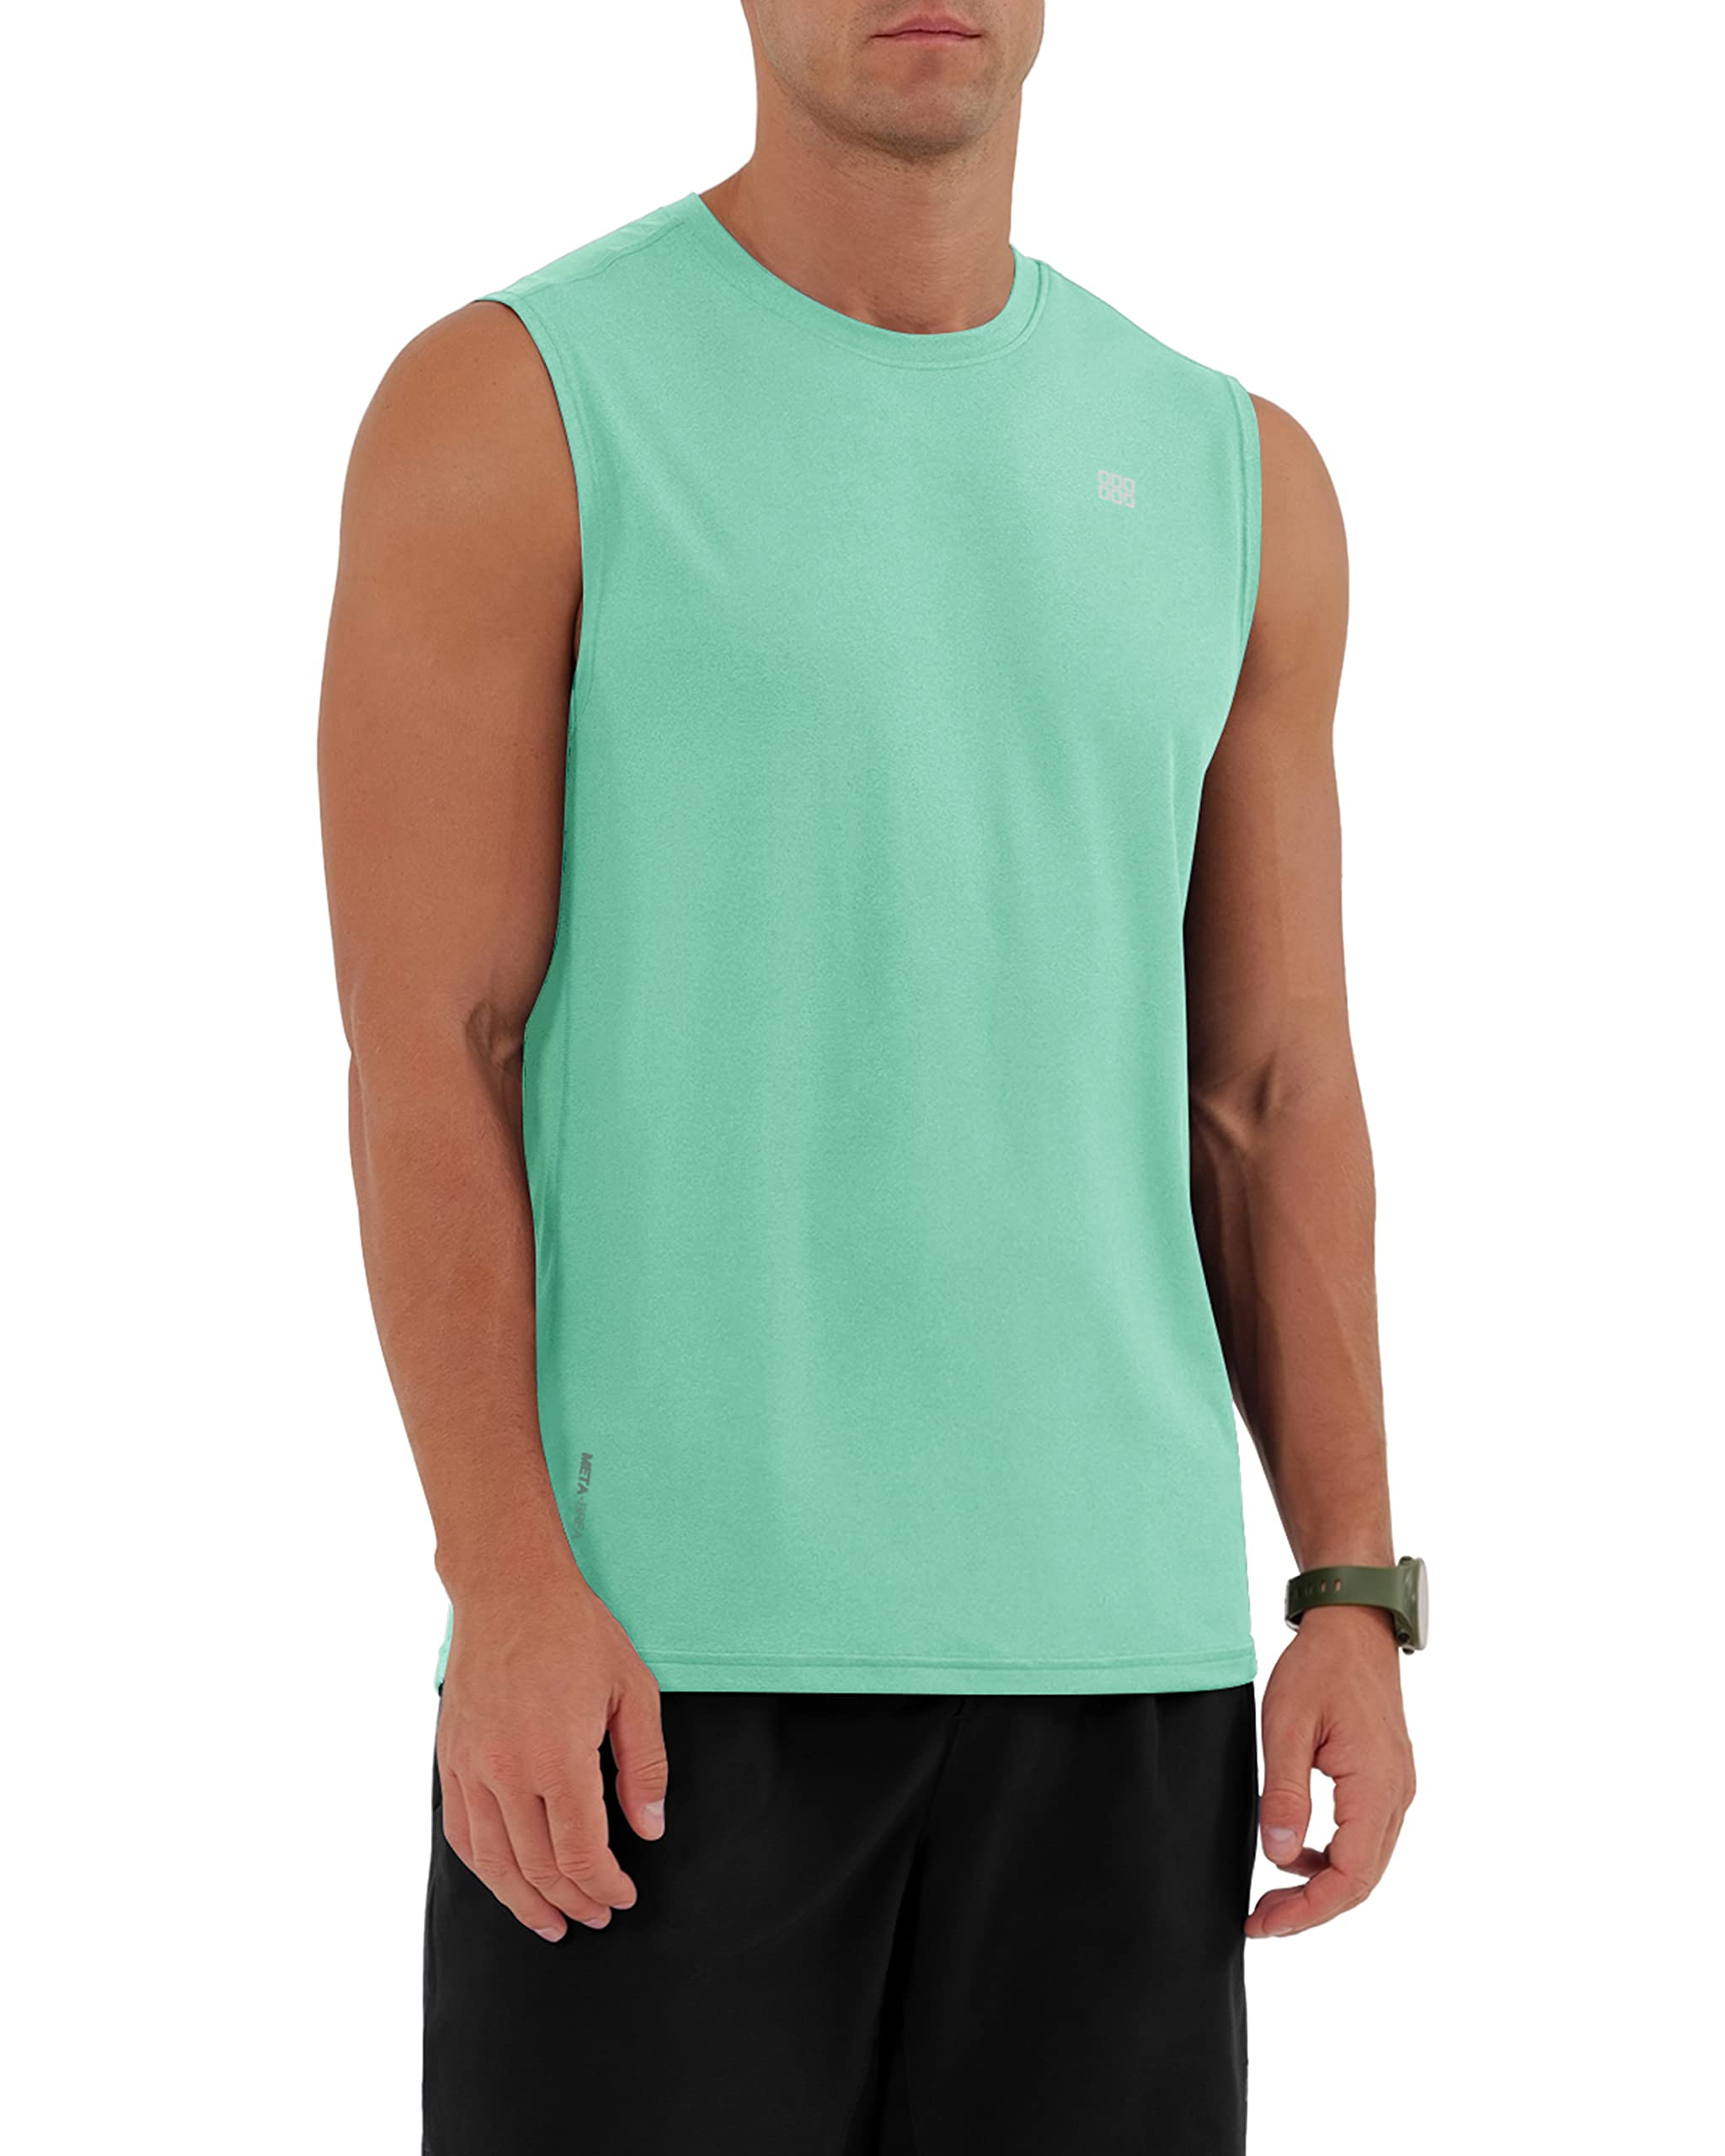 ODODOS Men's Muscle Shirts UPF 50+ Sleeveless Quick Dry Gym Workout Tank  Top Mint Green-a (1 Pack) XX-Large Tall